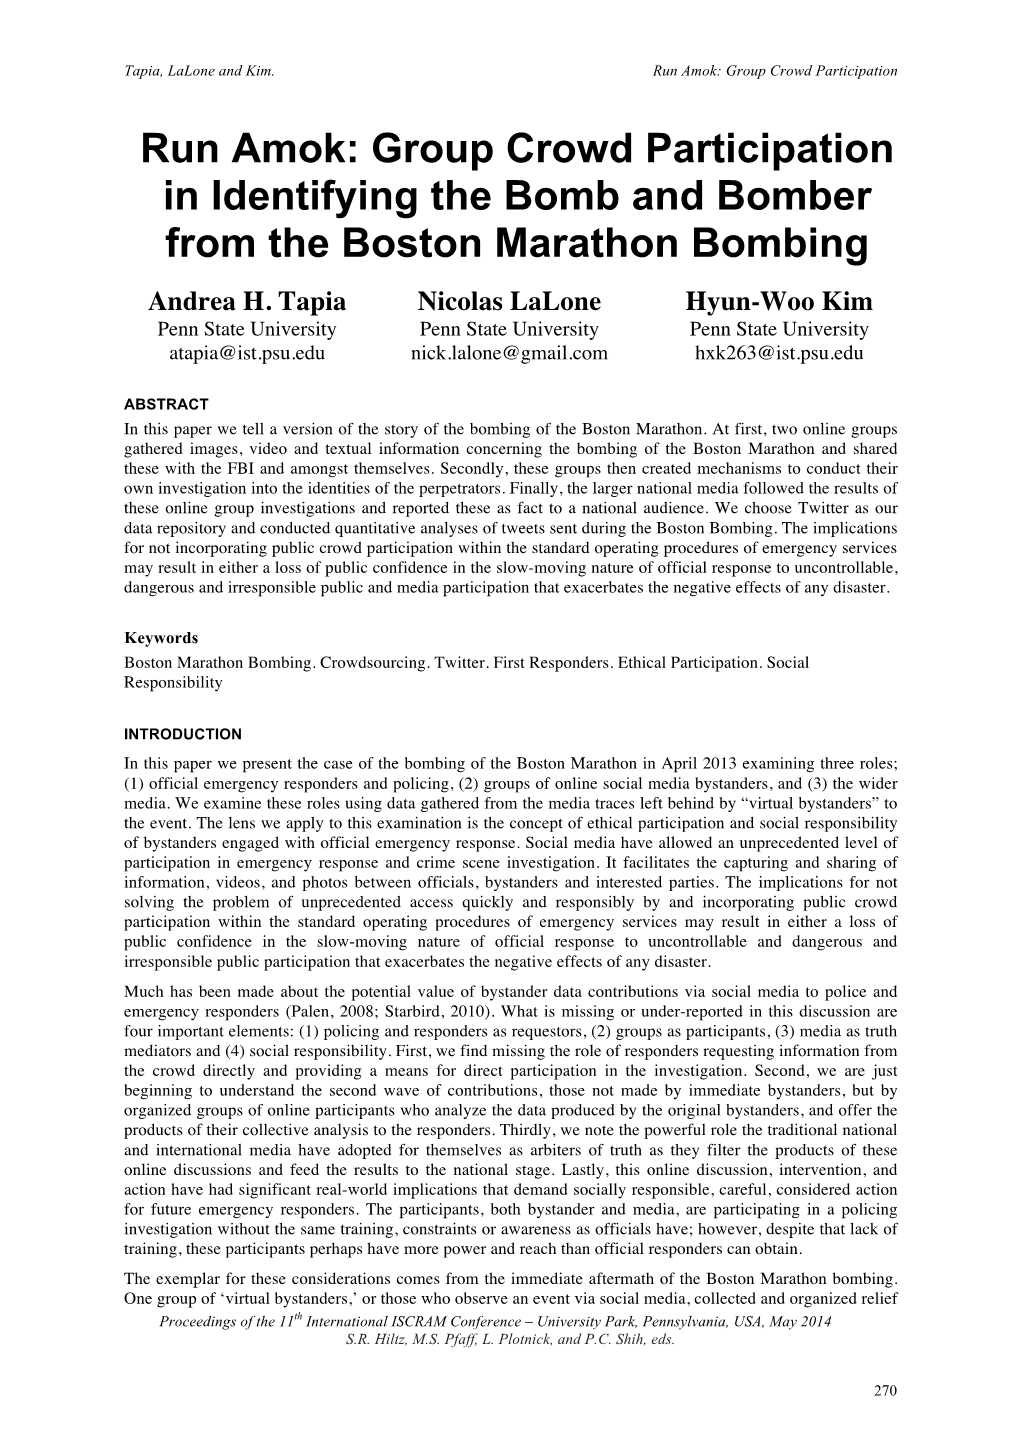 Group Crowd Participation in Identifying the Bomb and Bomber from the Boston Marathon Bombing